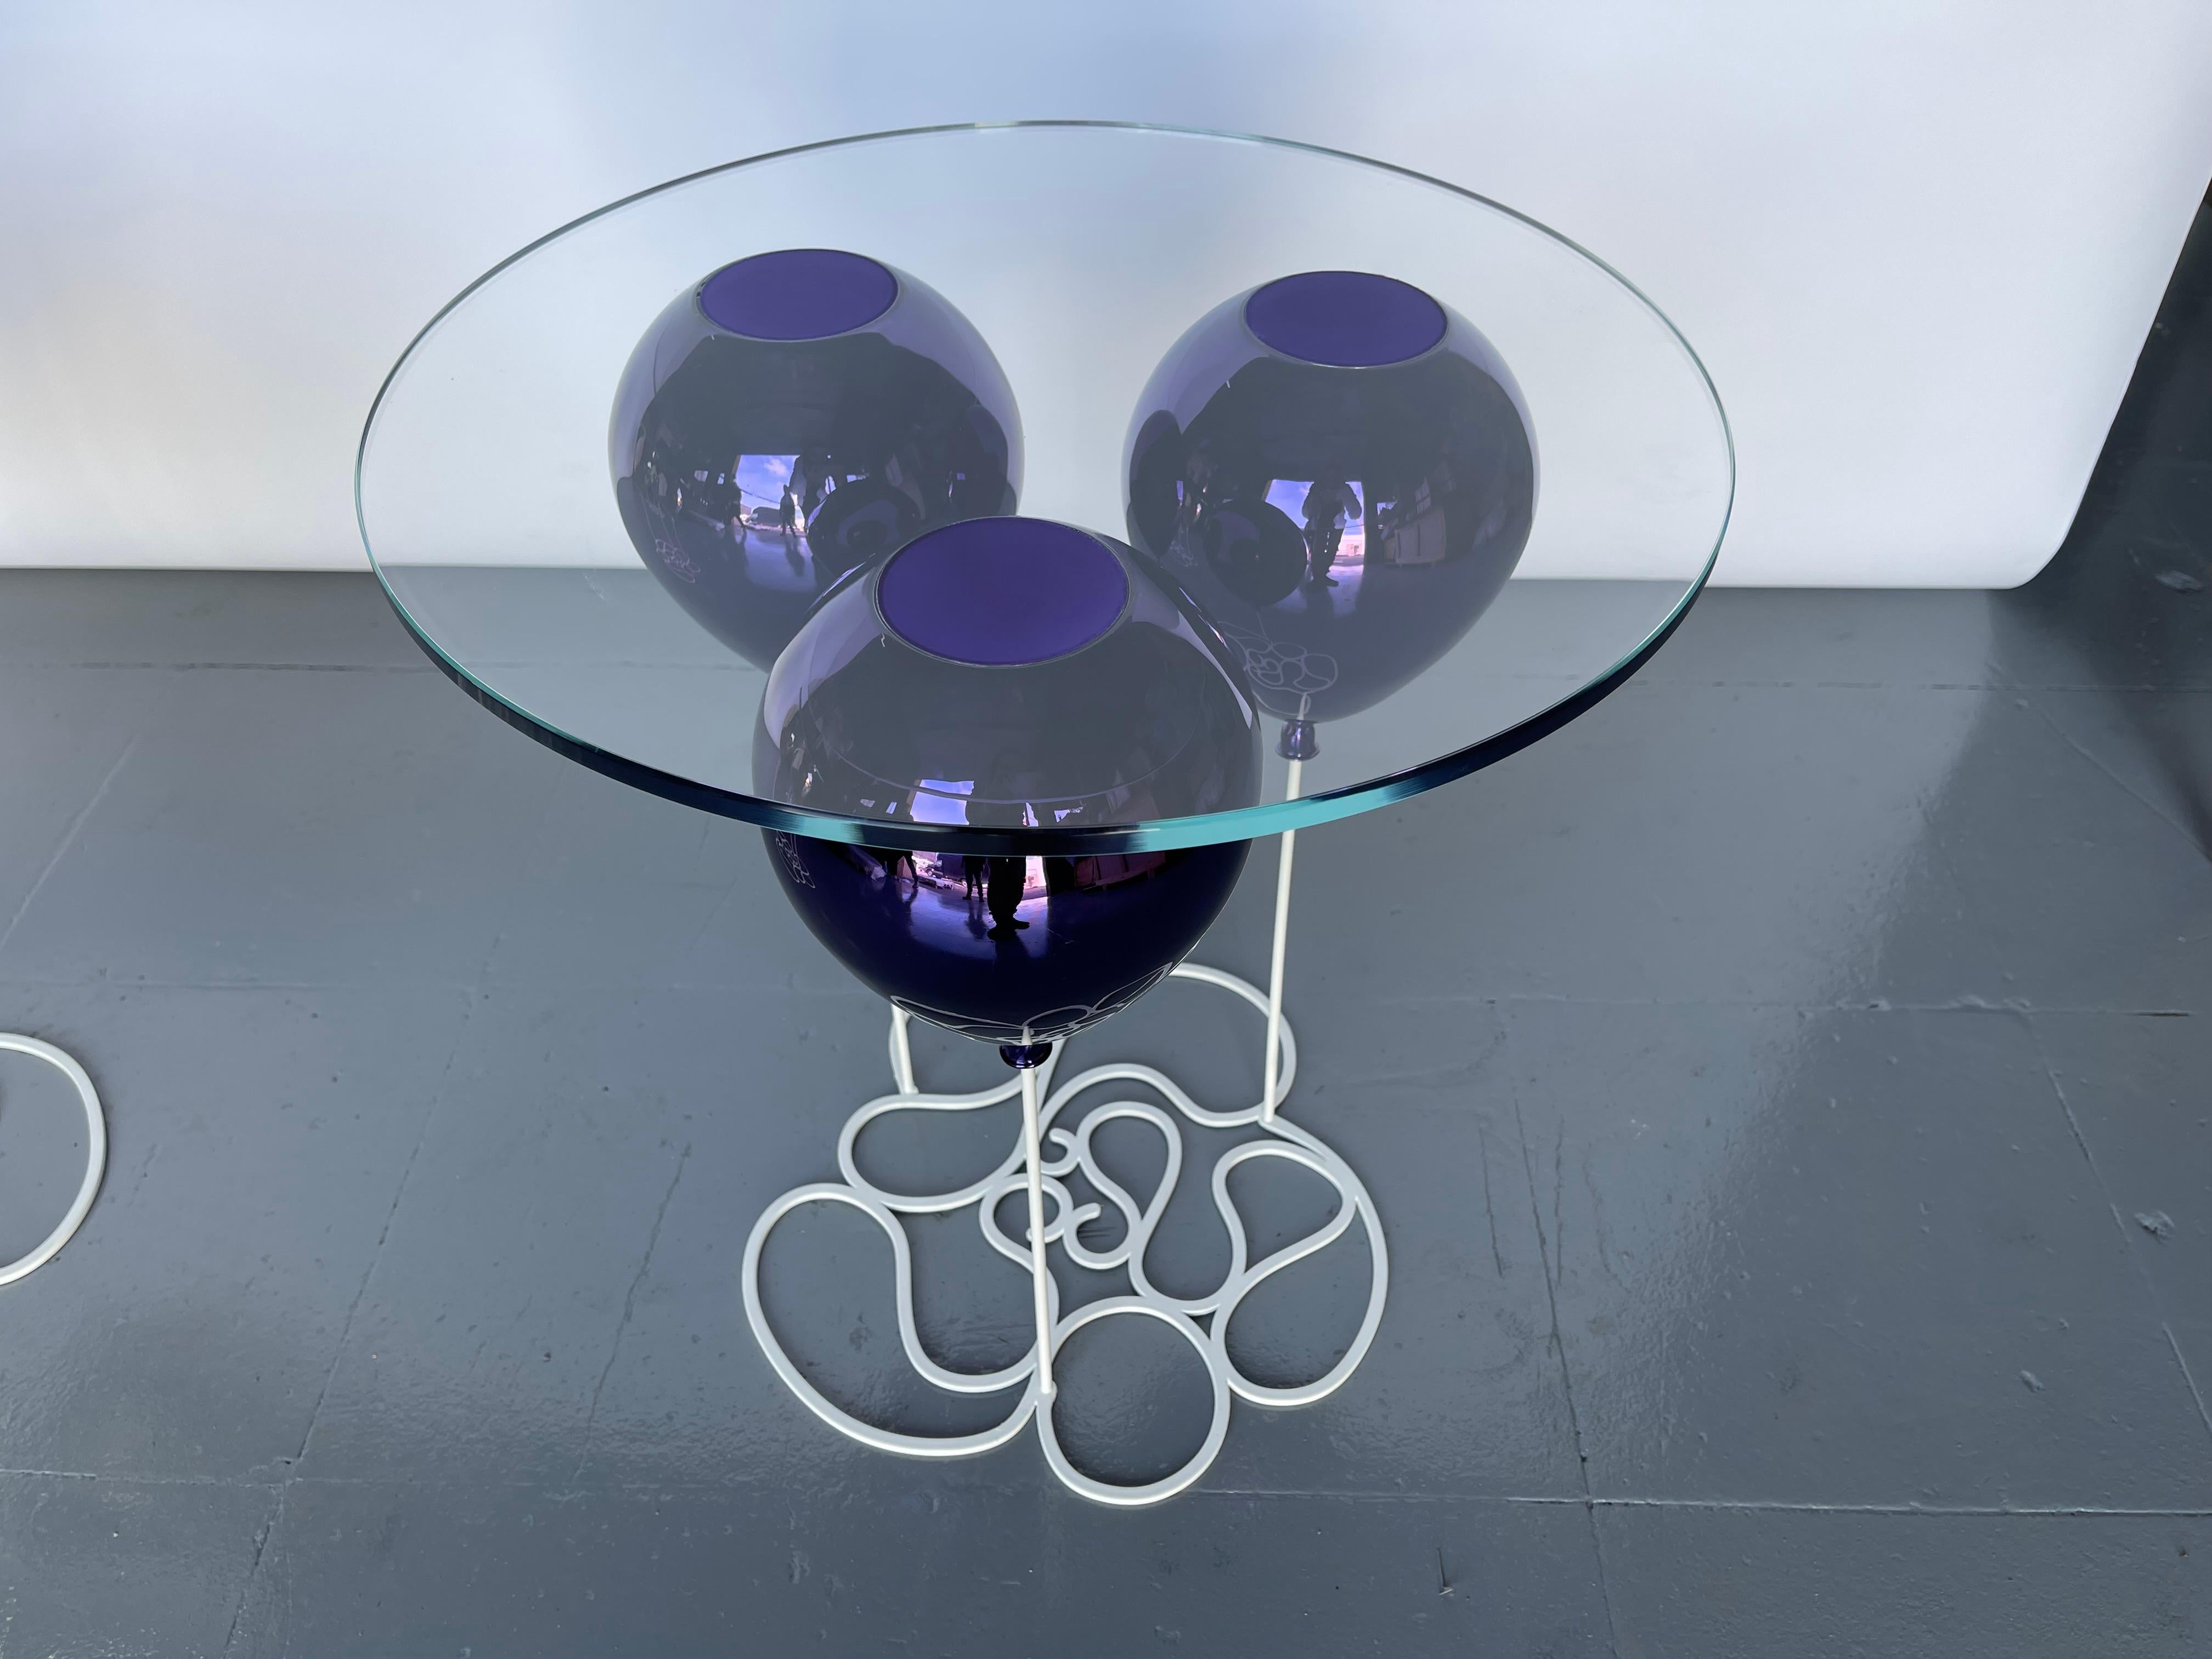 A post-modern, illusionary side table in a striking metallic purple finish from acclaimed British furniture designer Duffy London.

The UP! Balloon Side Table is a playful trompe l’oeil furniture piece. A trio of metallic, purple balloons impresses